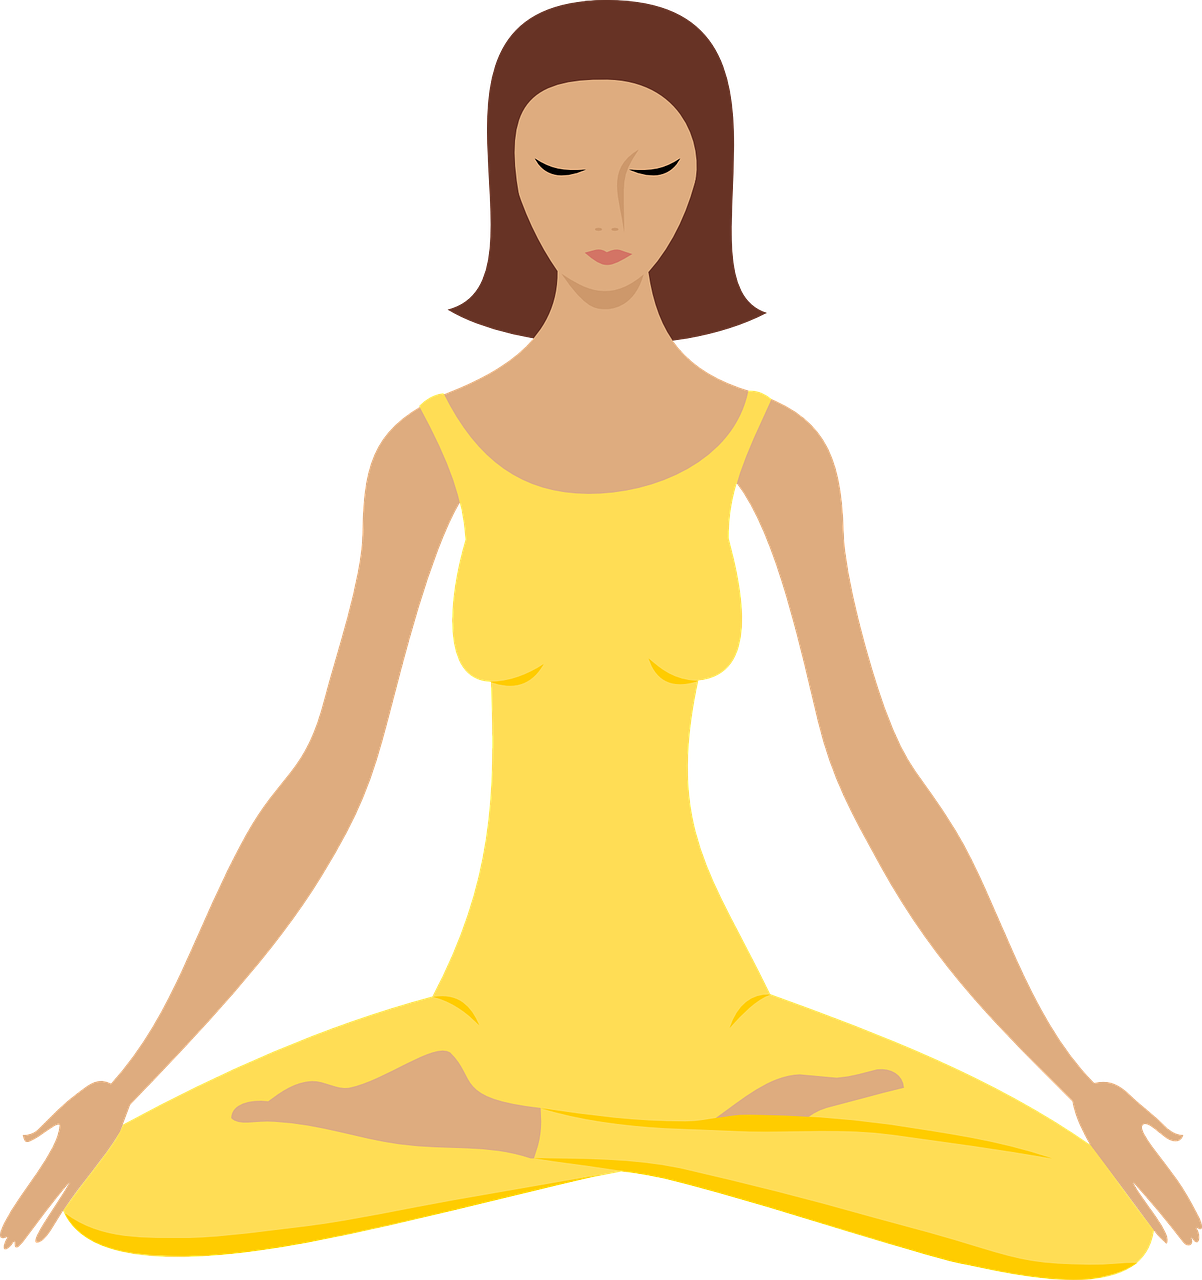 Meditation clipart shadow. What are the health